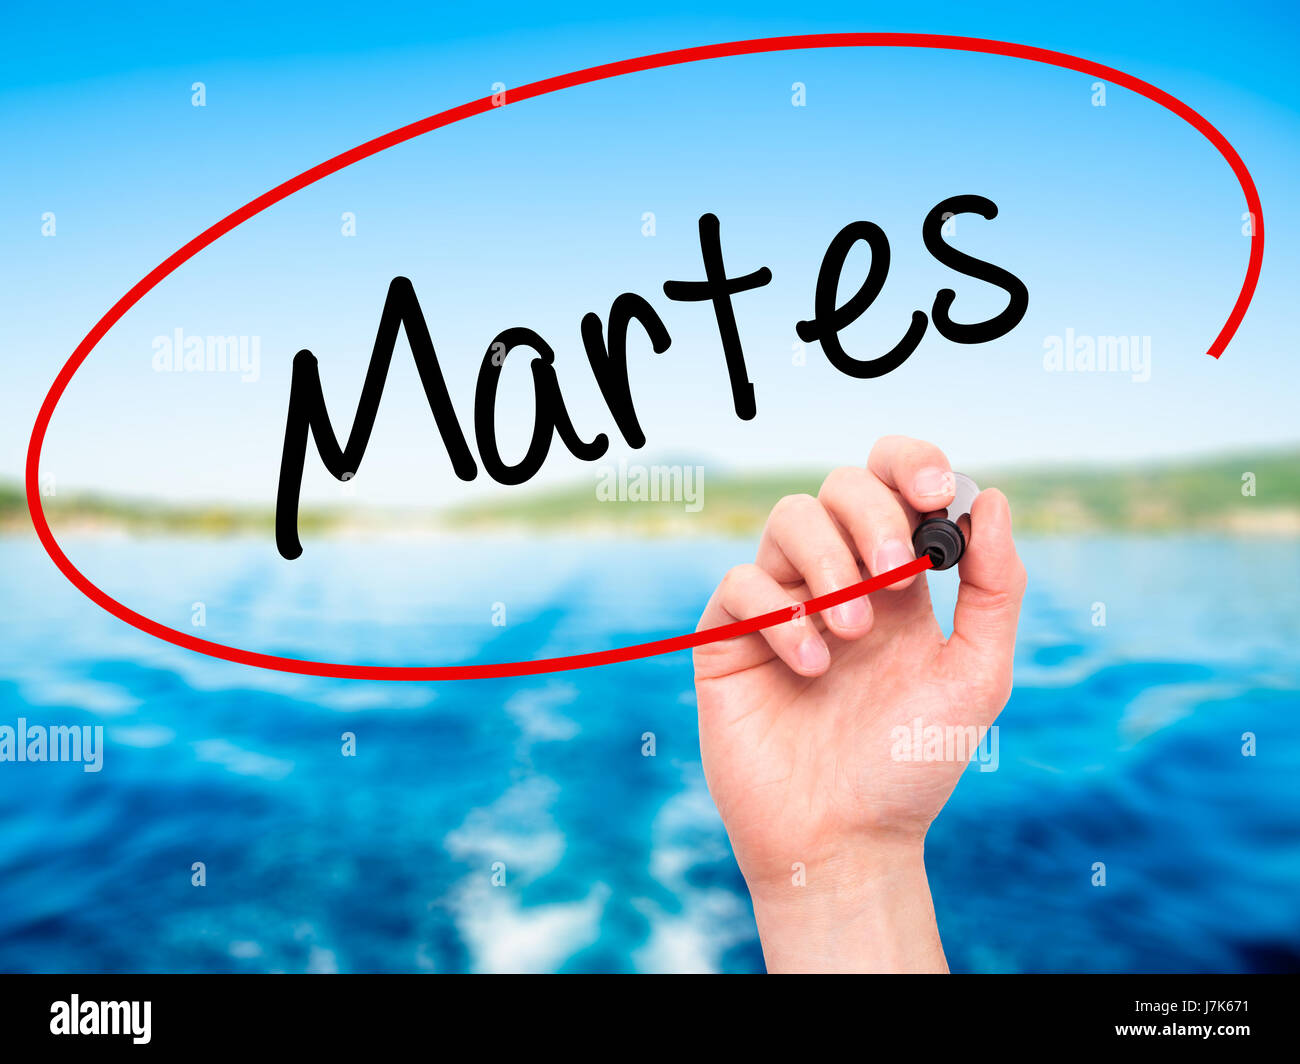 Man Hand Writing Martes Tuesday Spanish Black Marker Visual Screen Stock  Photo by ©YAYImages 262861048